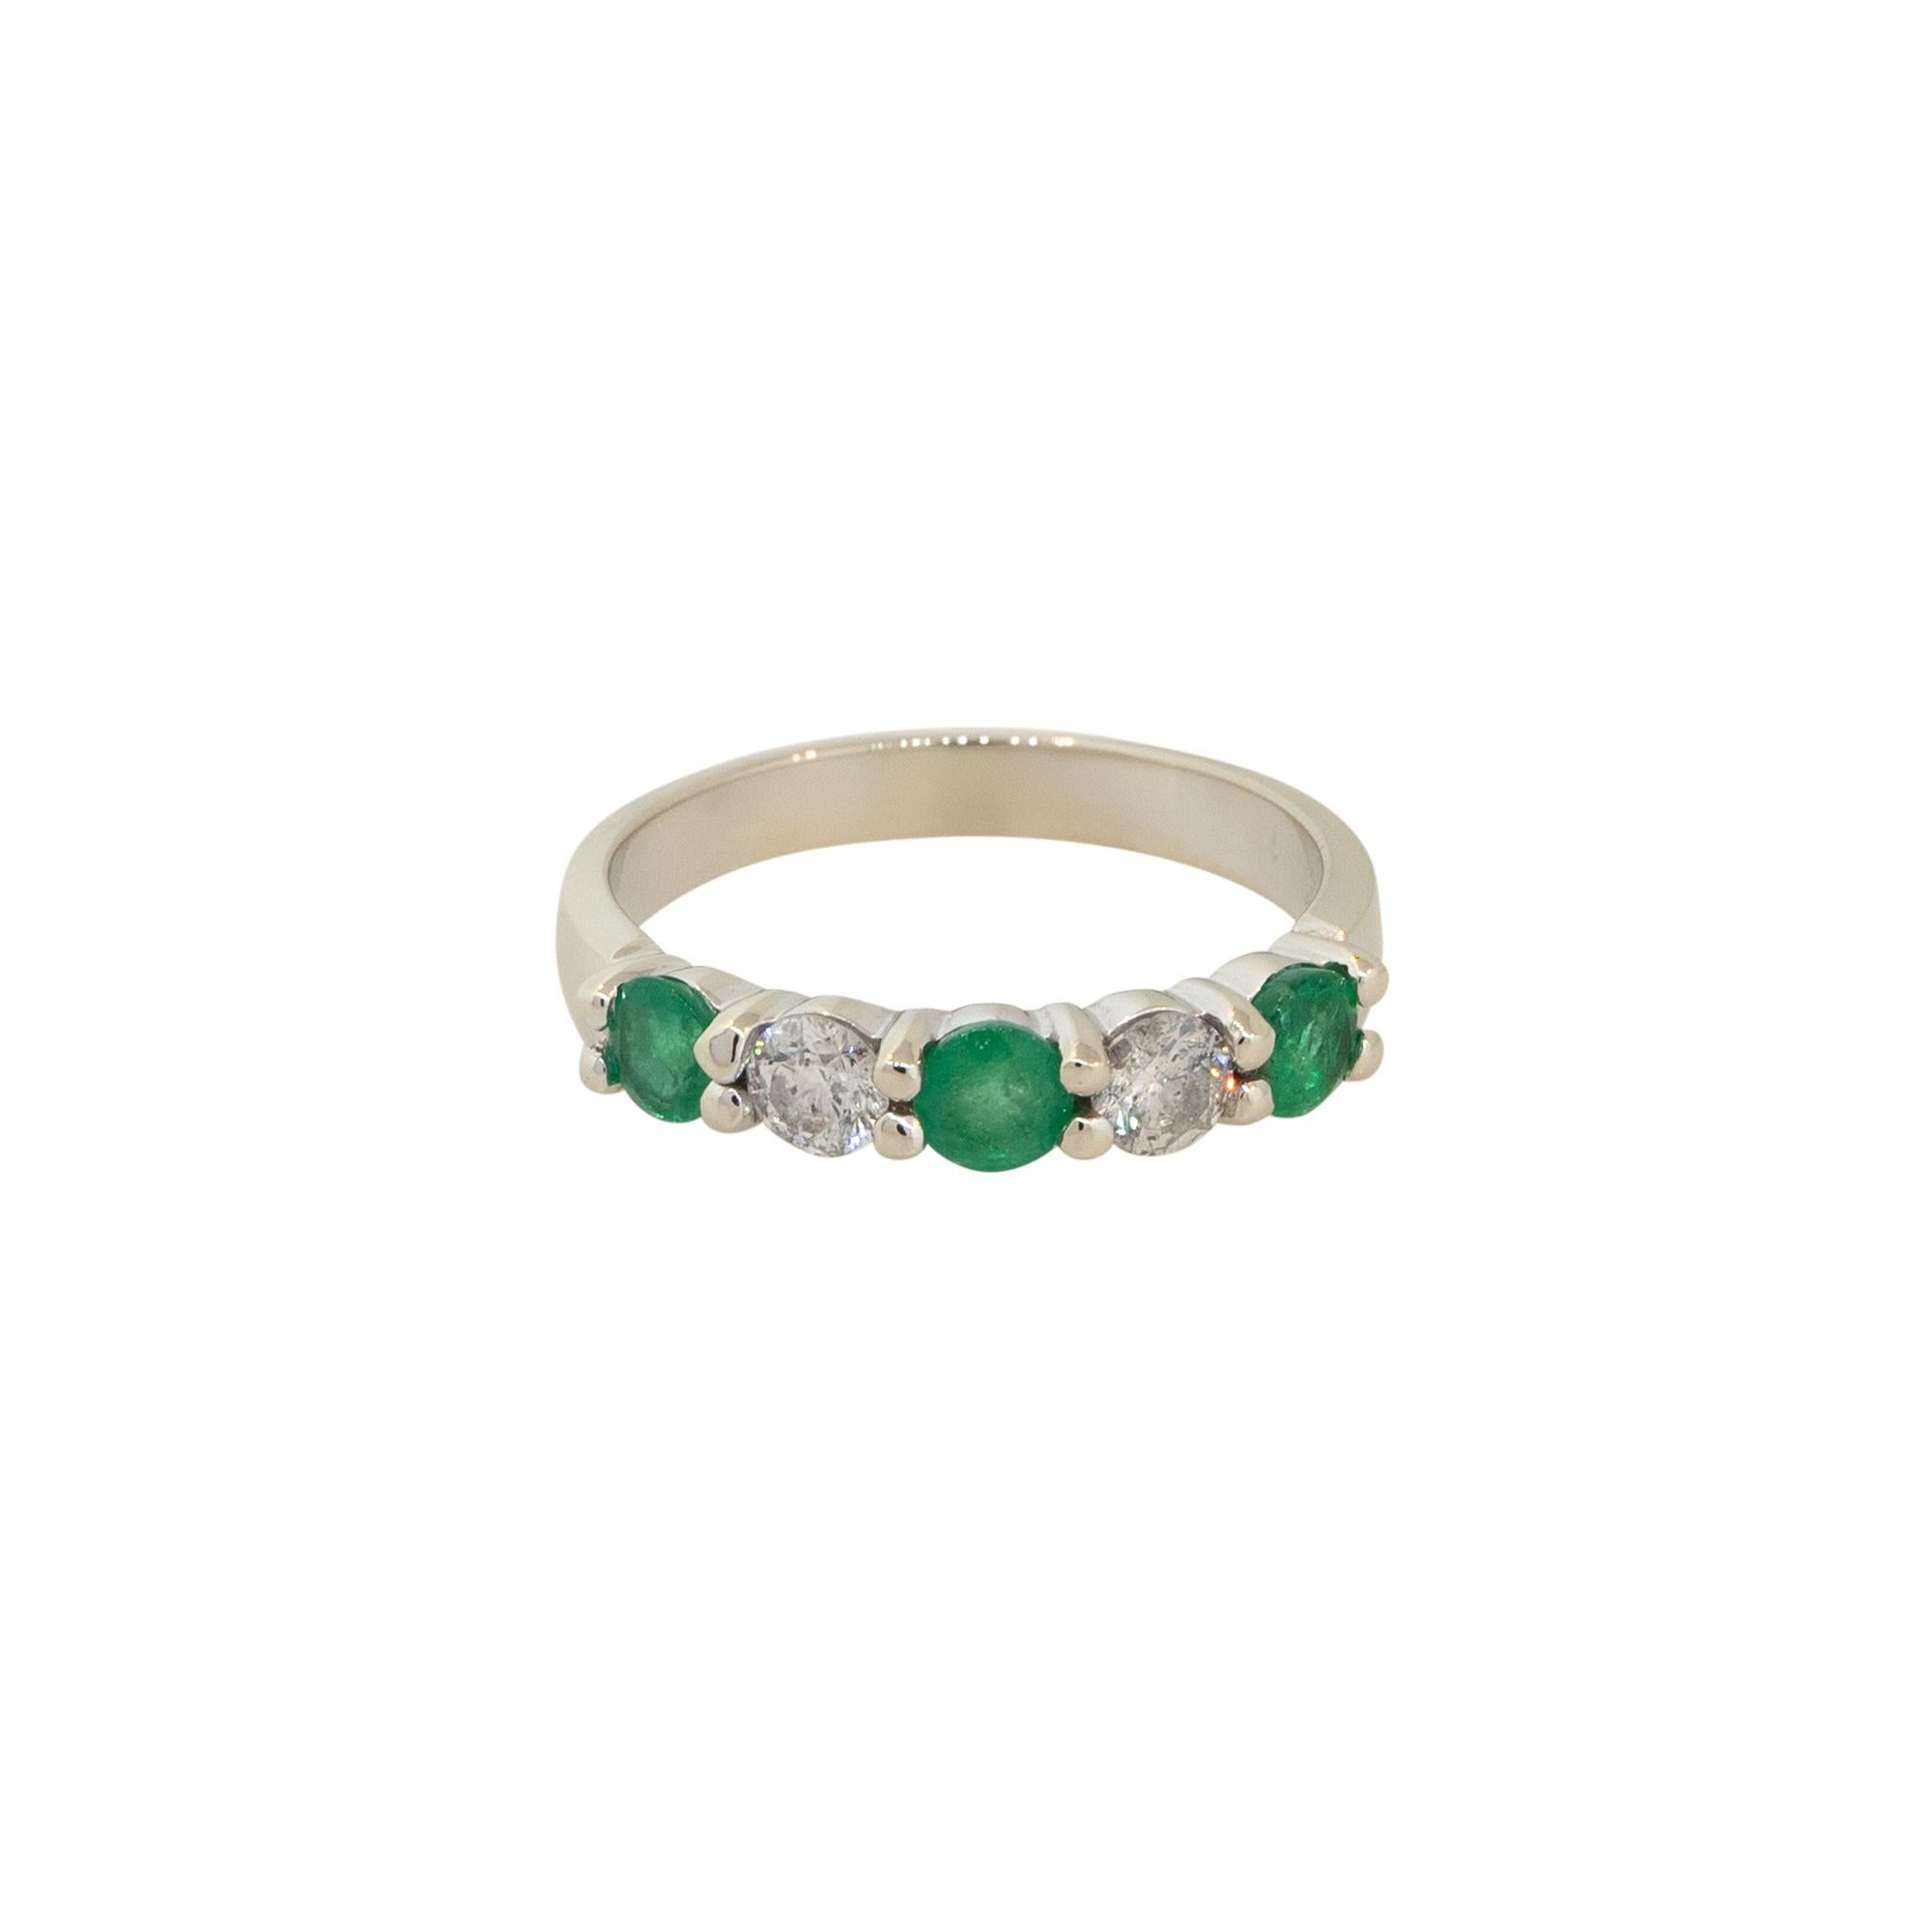 Material: 14k White Gold
Diamond Details: Approx. 0.40ctw of Round Cut Diamonds. Diamonds are G/H in color and VS/SI in clarity
Gemstone Details: Approx. 0.60ctw of Round Cut Emeralds
Weight: 2.0dwt
Additional Details: This item comes with a